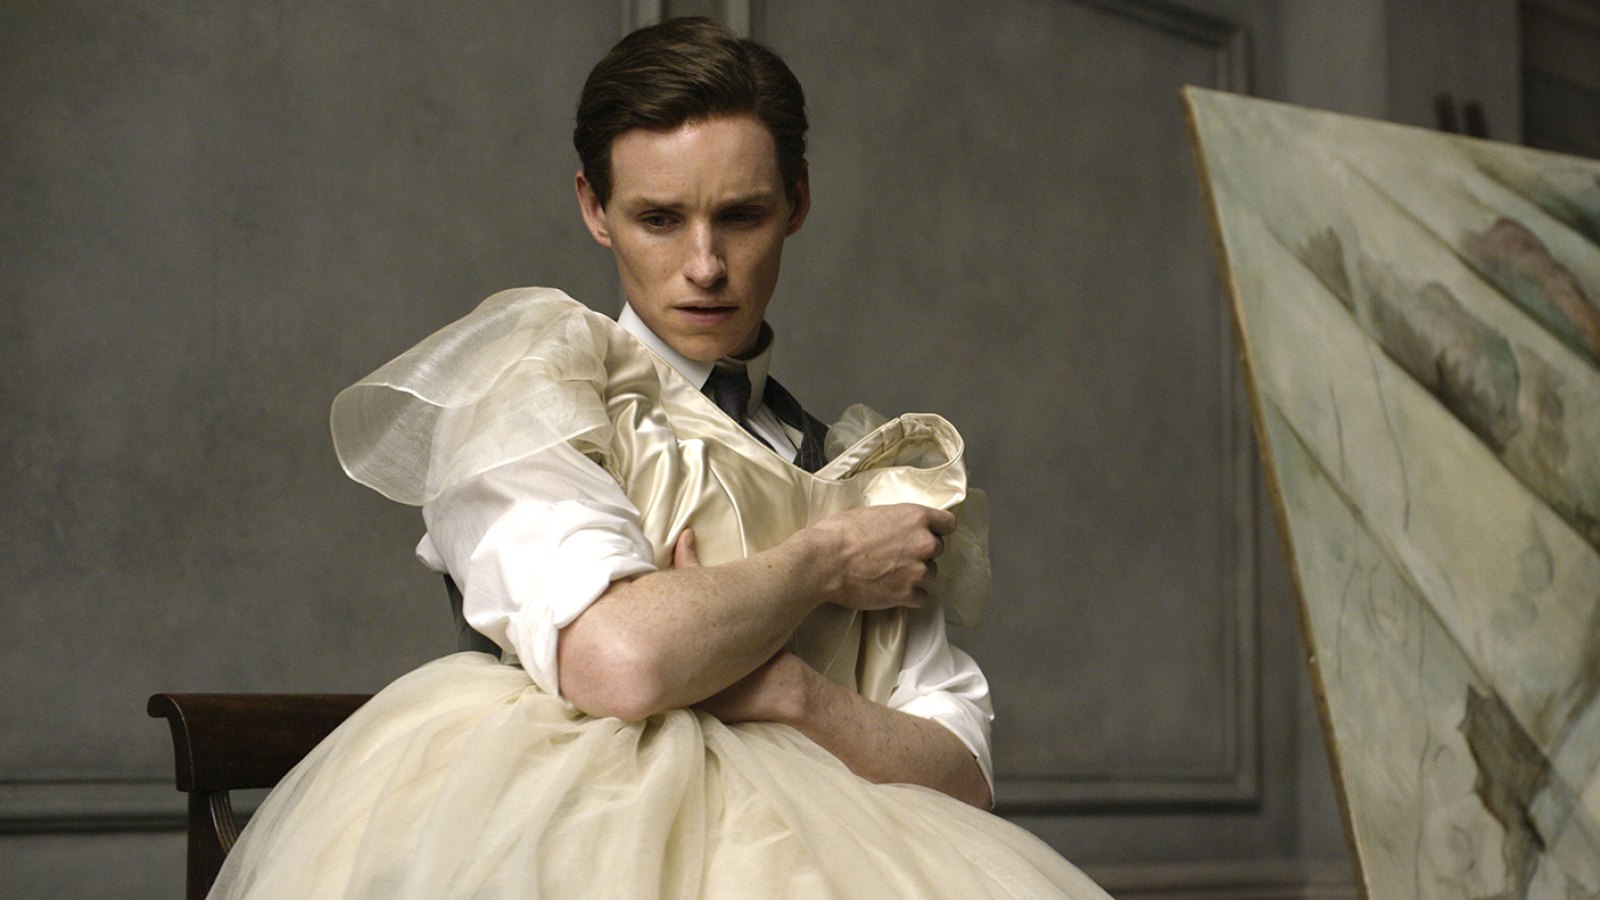 Eddie Redmayne Calls 'Danish Girl' Role a 'Mistake,' Though He Made Film With 'Best Intentions'